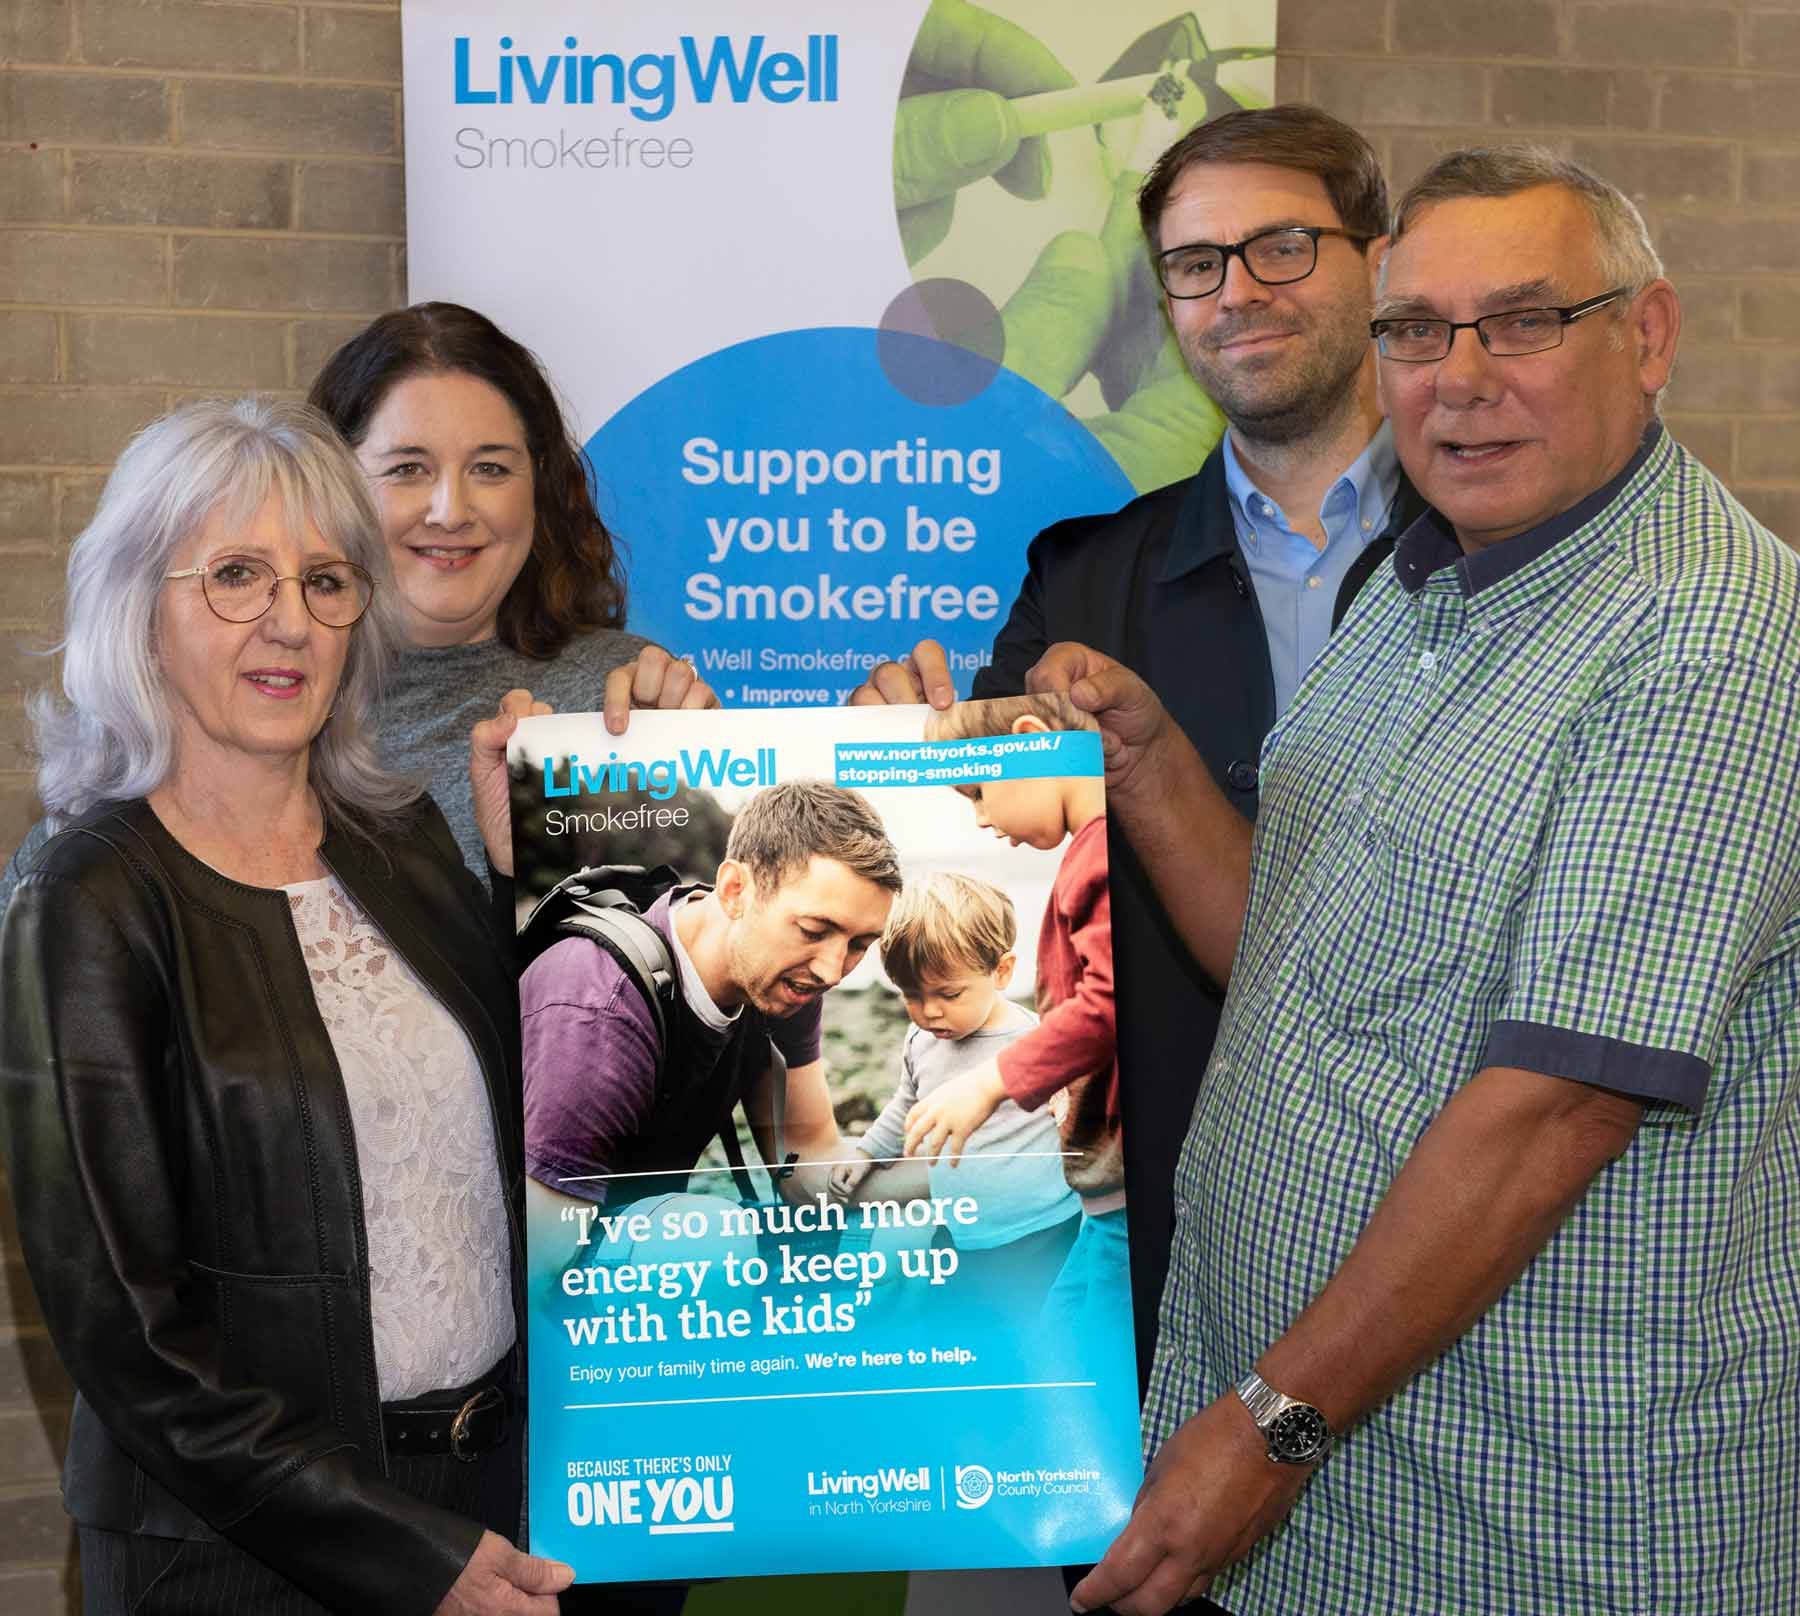 Cllr Dickinson with Ged Wilkinson and Living Well team members Sarah Parkinson and Scott Chapman